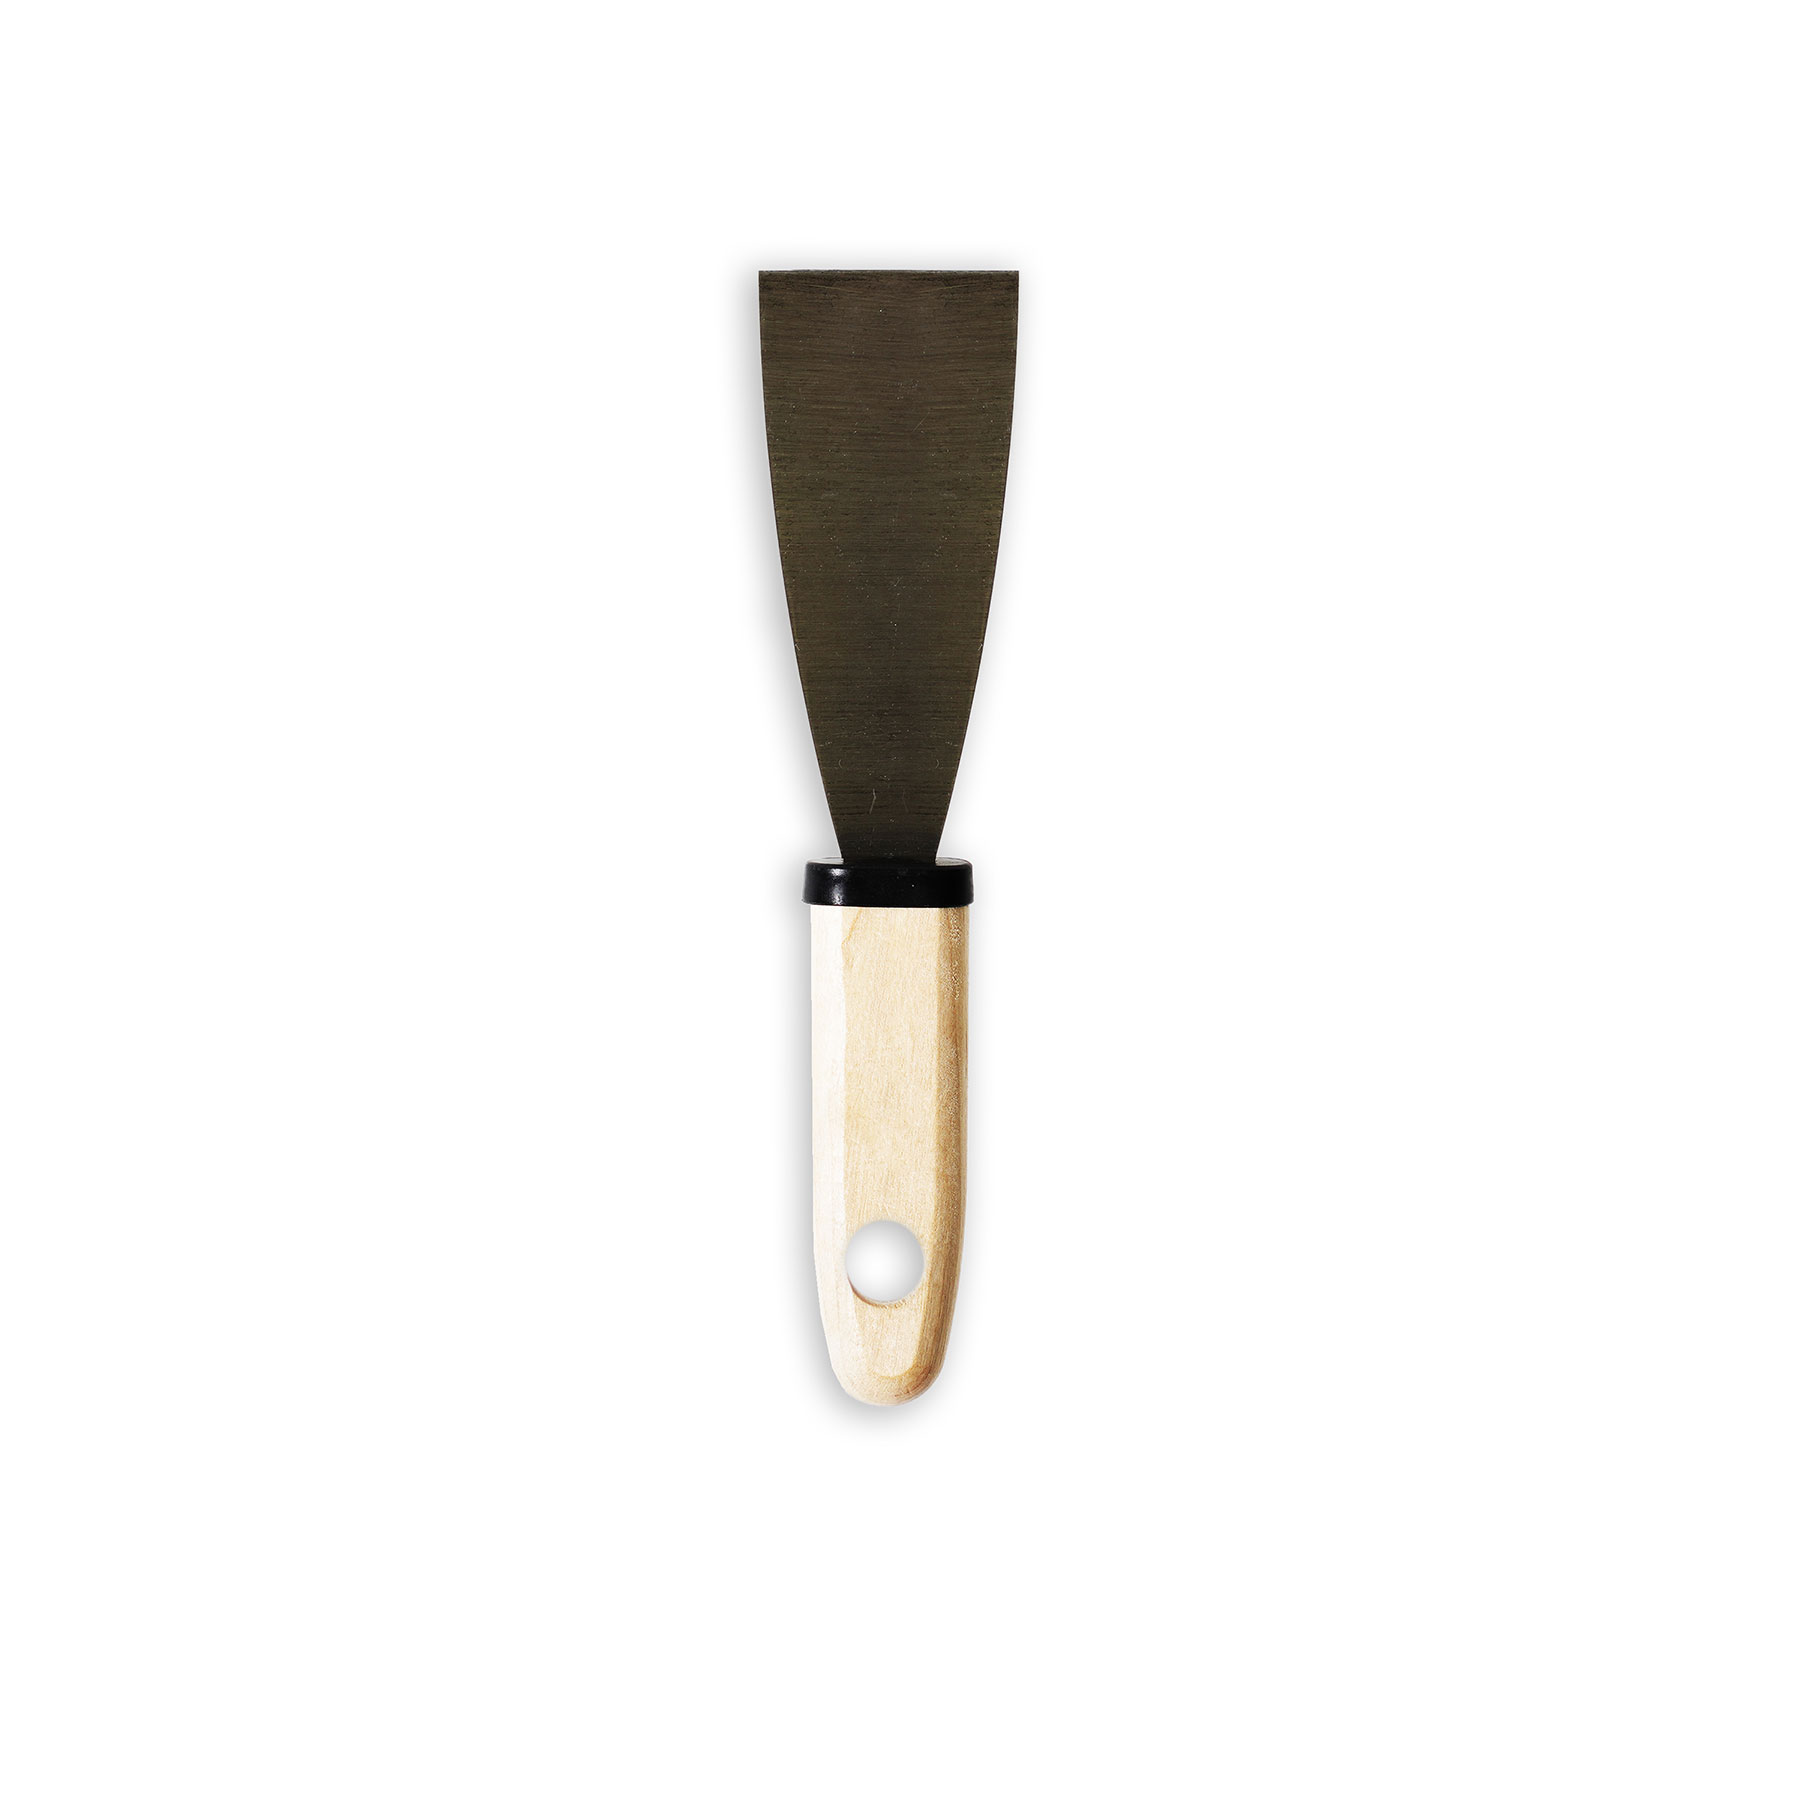             Painter spatula 40mm with flexible steel blade & wooden handle
        